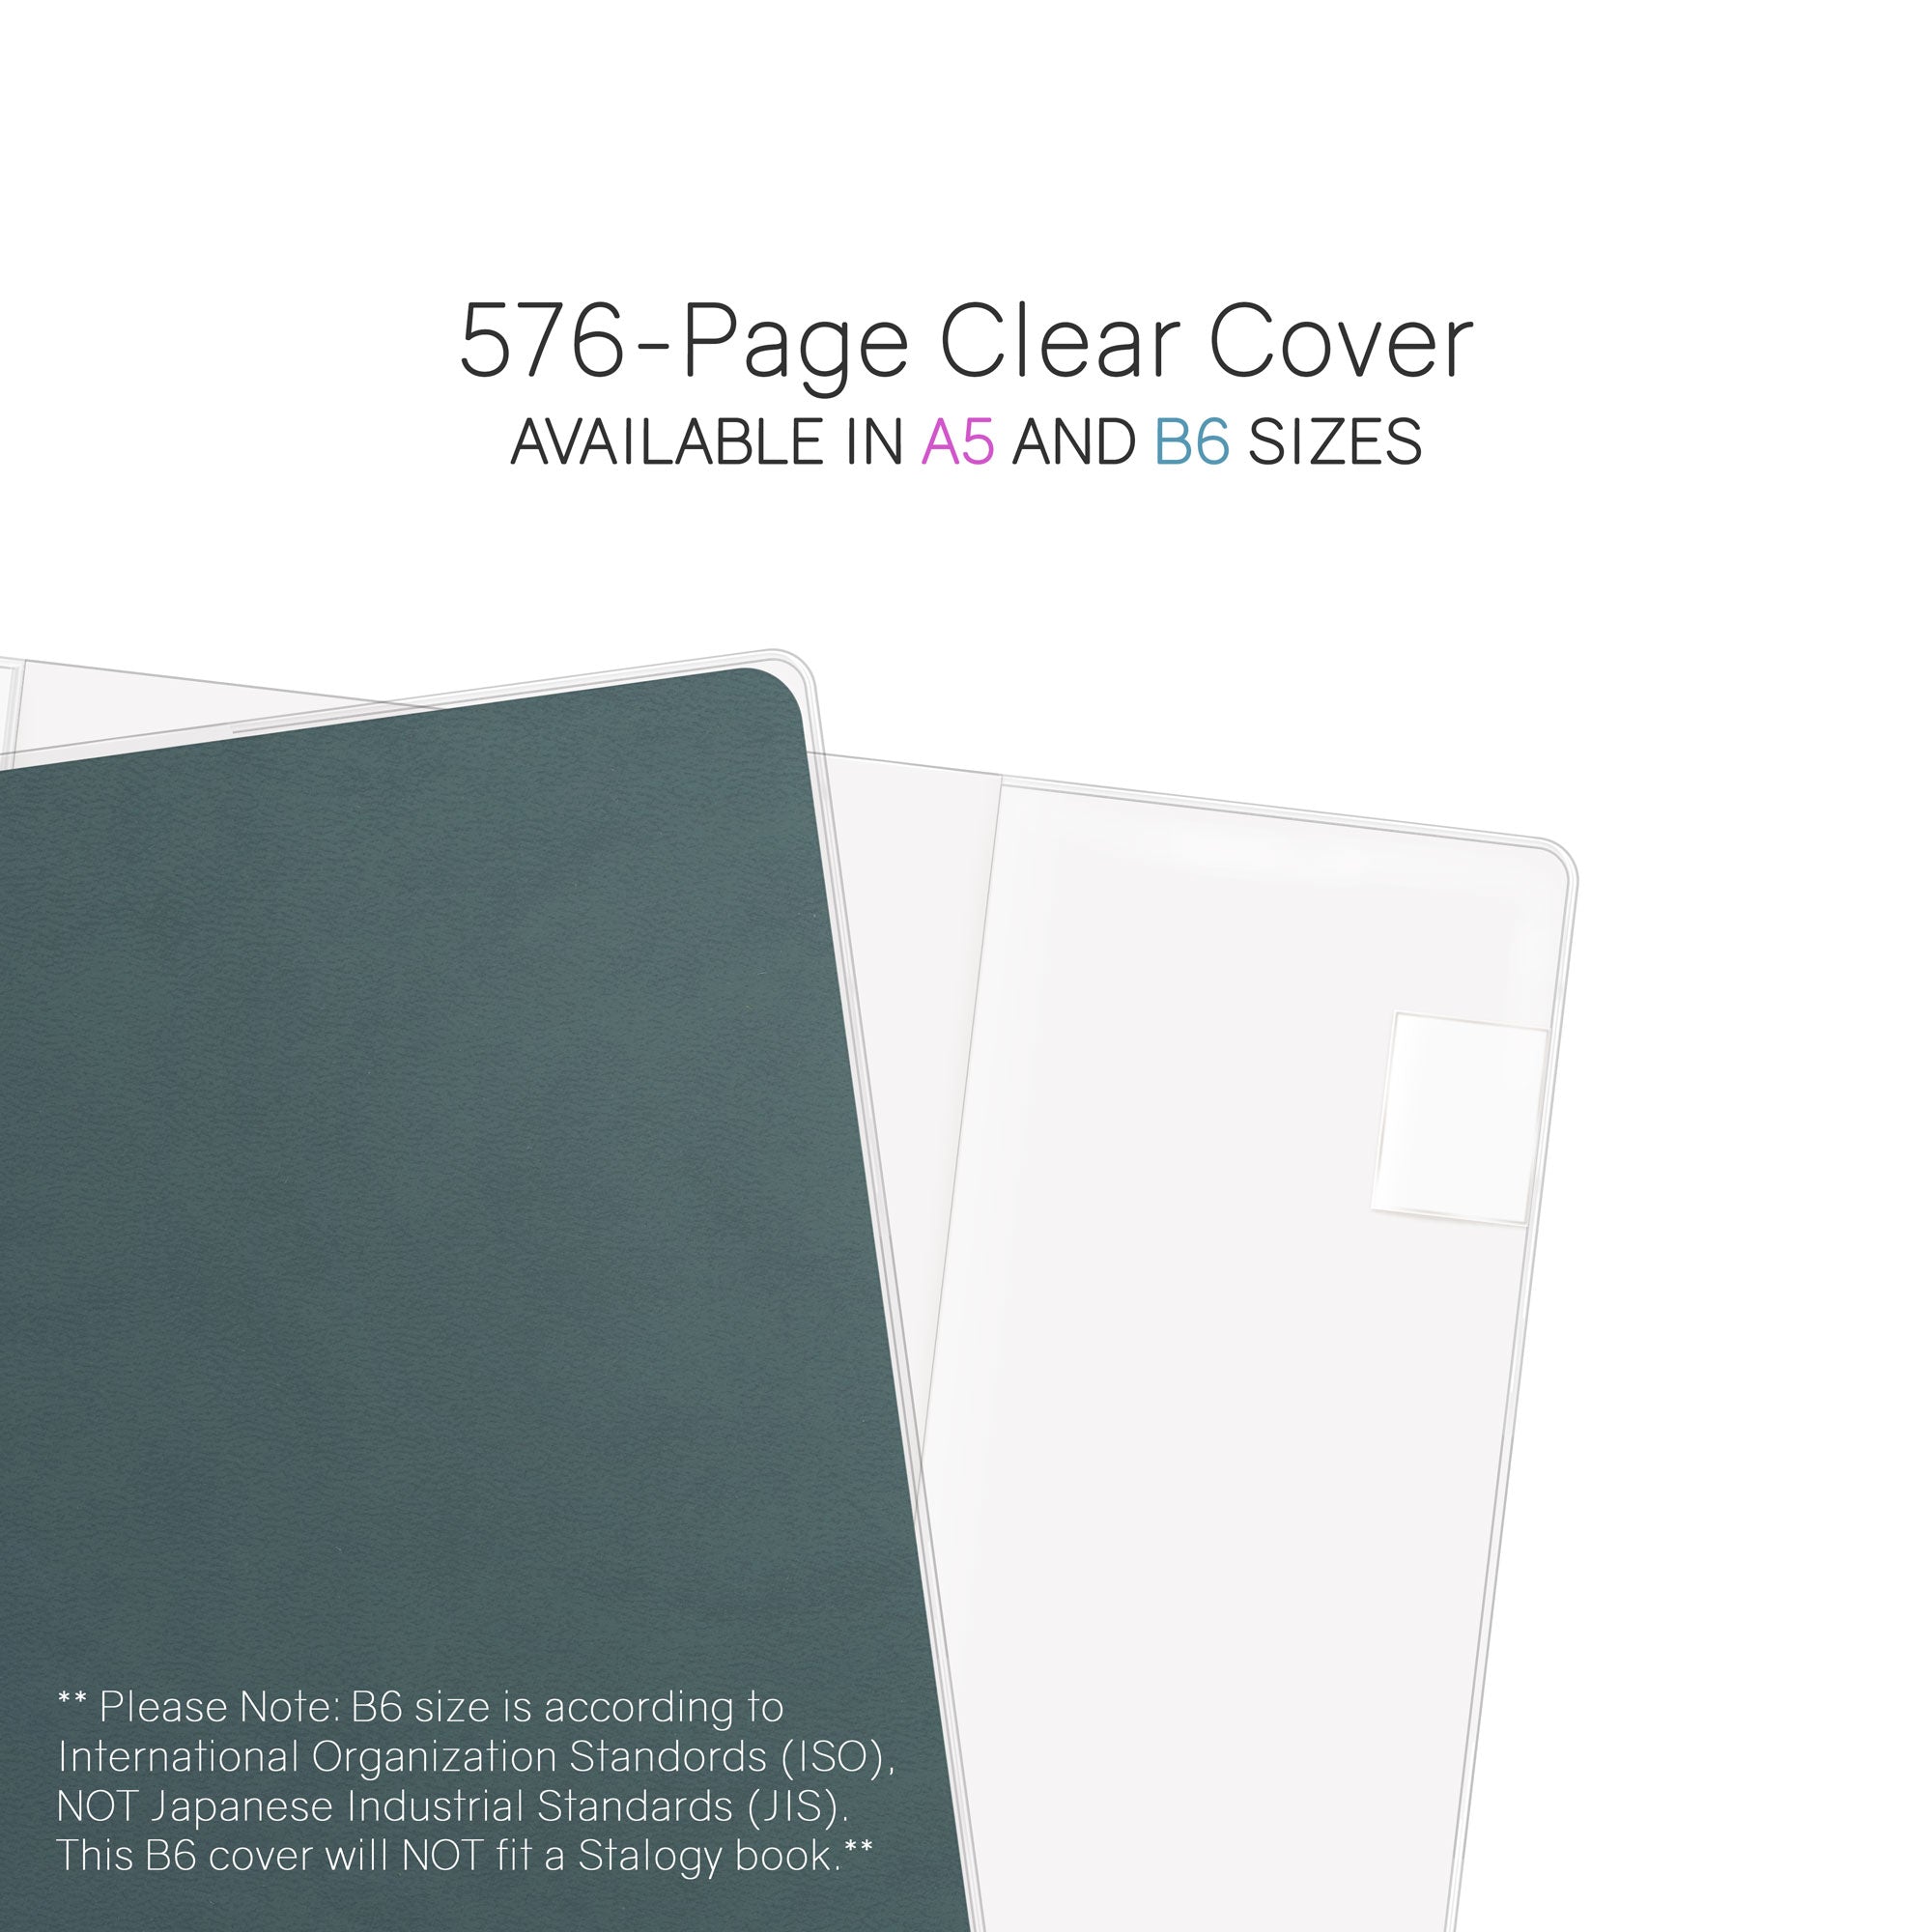 Vinyl Clear Cover (576pg All-In-One Planner)